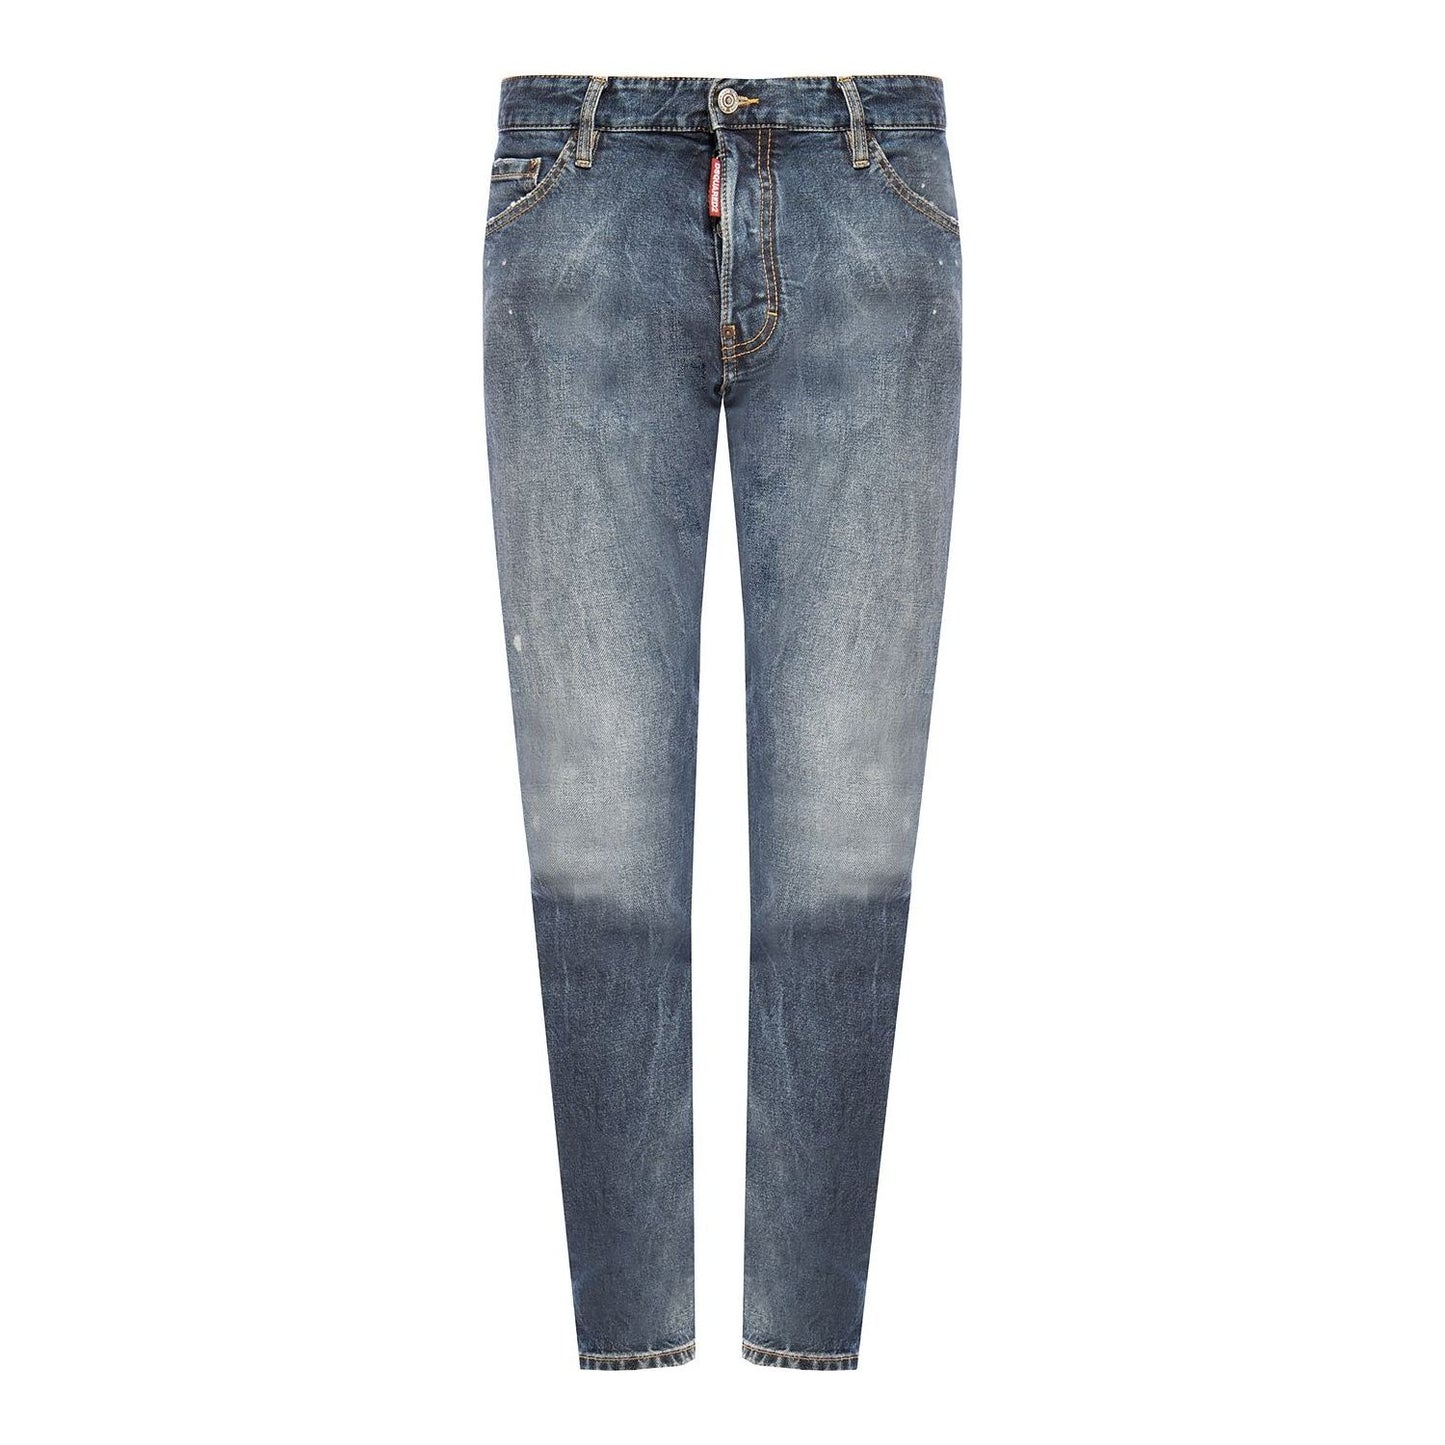 Dsquared² Navy Distressed 'Cool Guy Jean' Denim Pants blue-cotton-jeans-pant-57 stock_product_image_4218_1452490902-e6f0ff46-f57.jpg